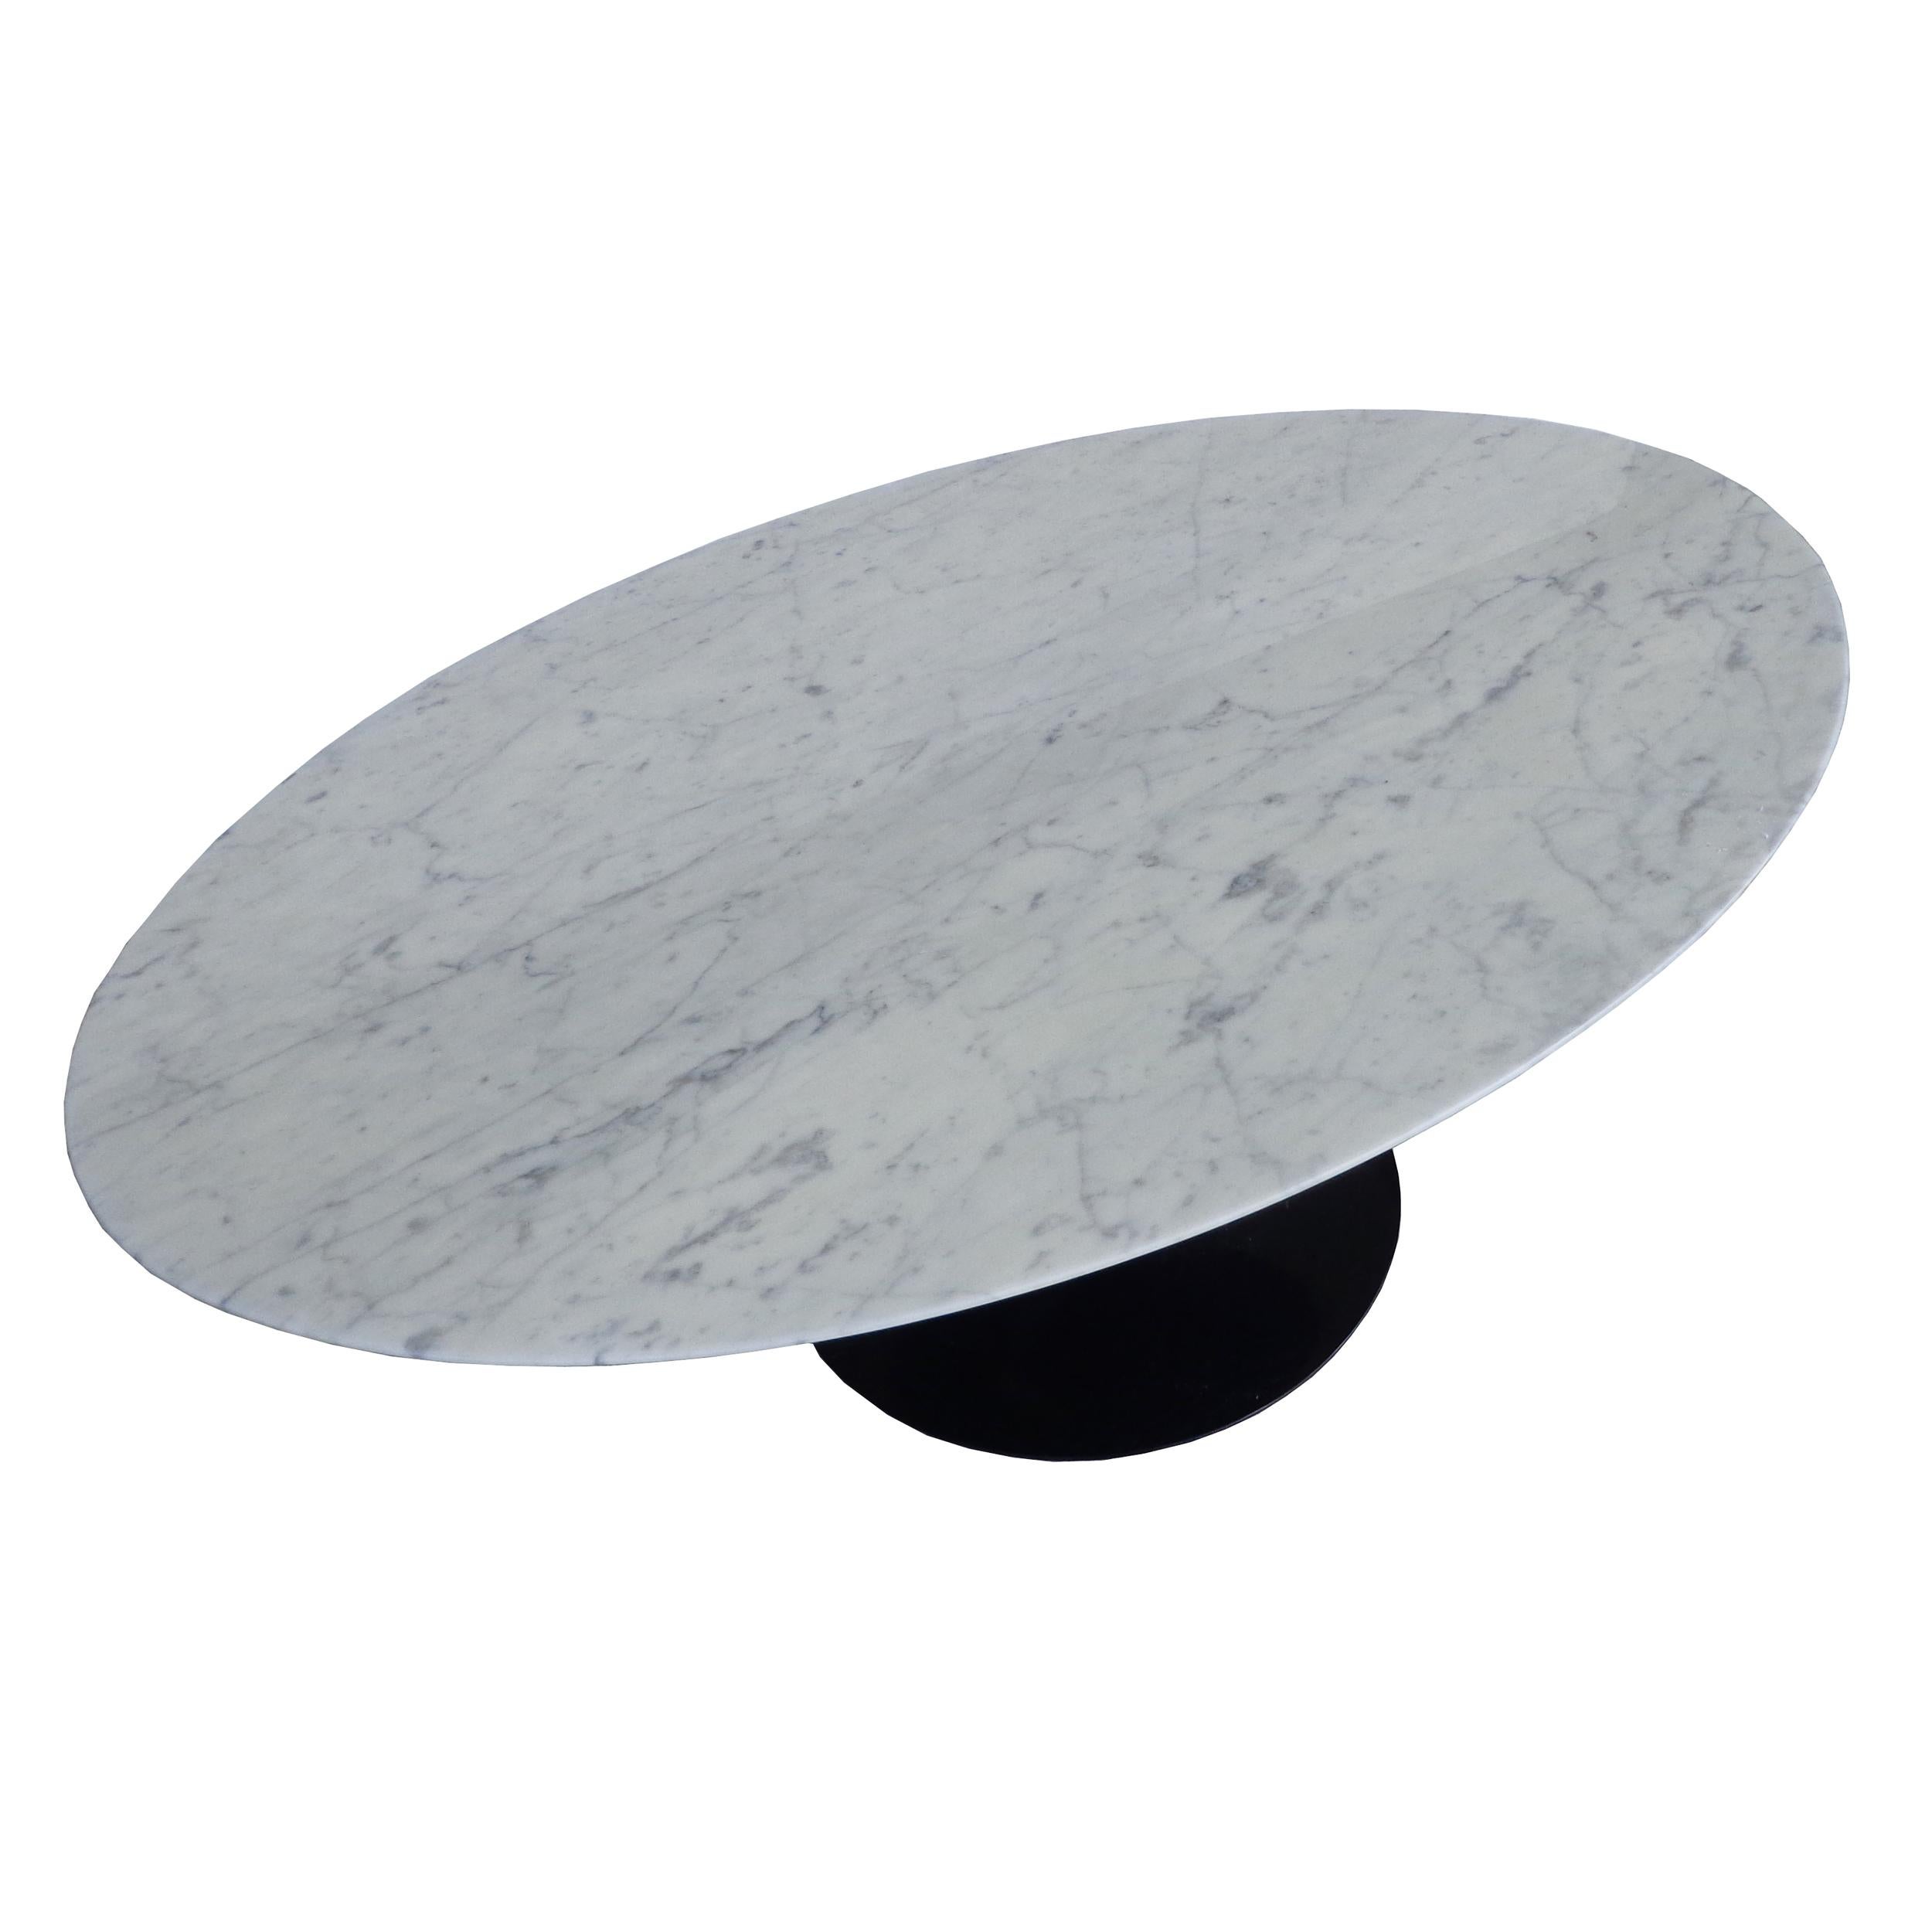 Knoll Studio Saarinen Marble Coffee Table 

Distinct sculptural base inspired by a drop of liquid.
A timeless modern classic in continuous production since 1956.

 
Sturdy, cast-aluminum base 
Solid marble 
Marked Knoll Studio